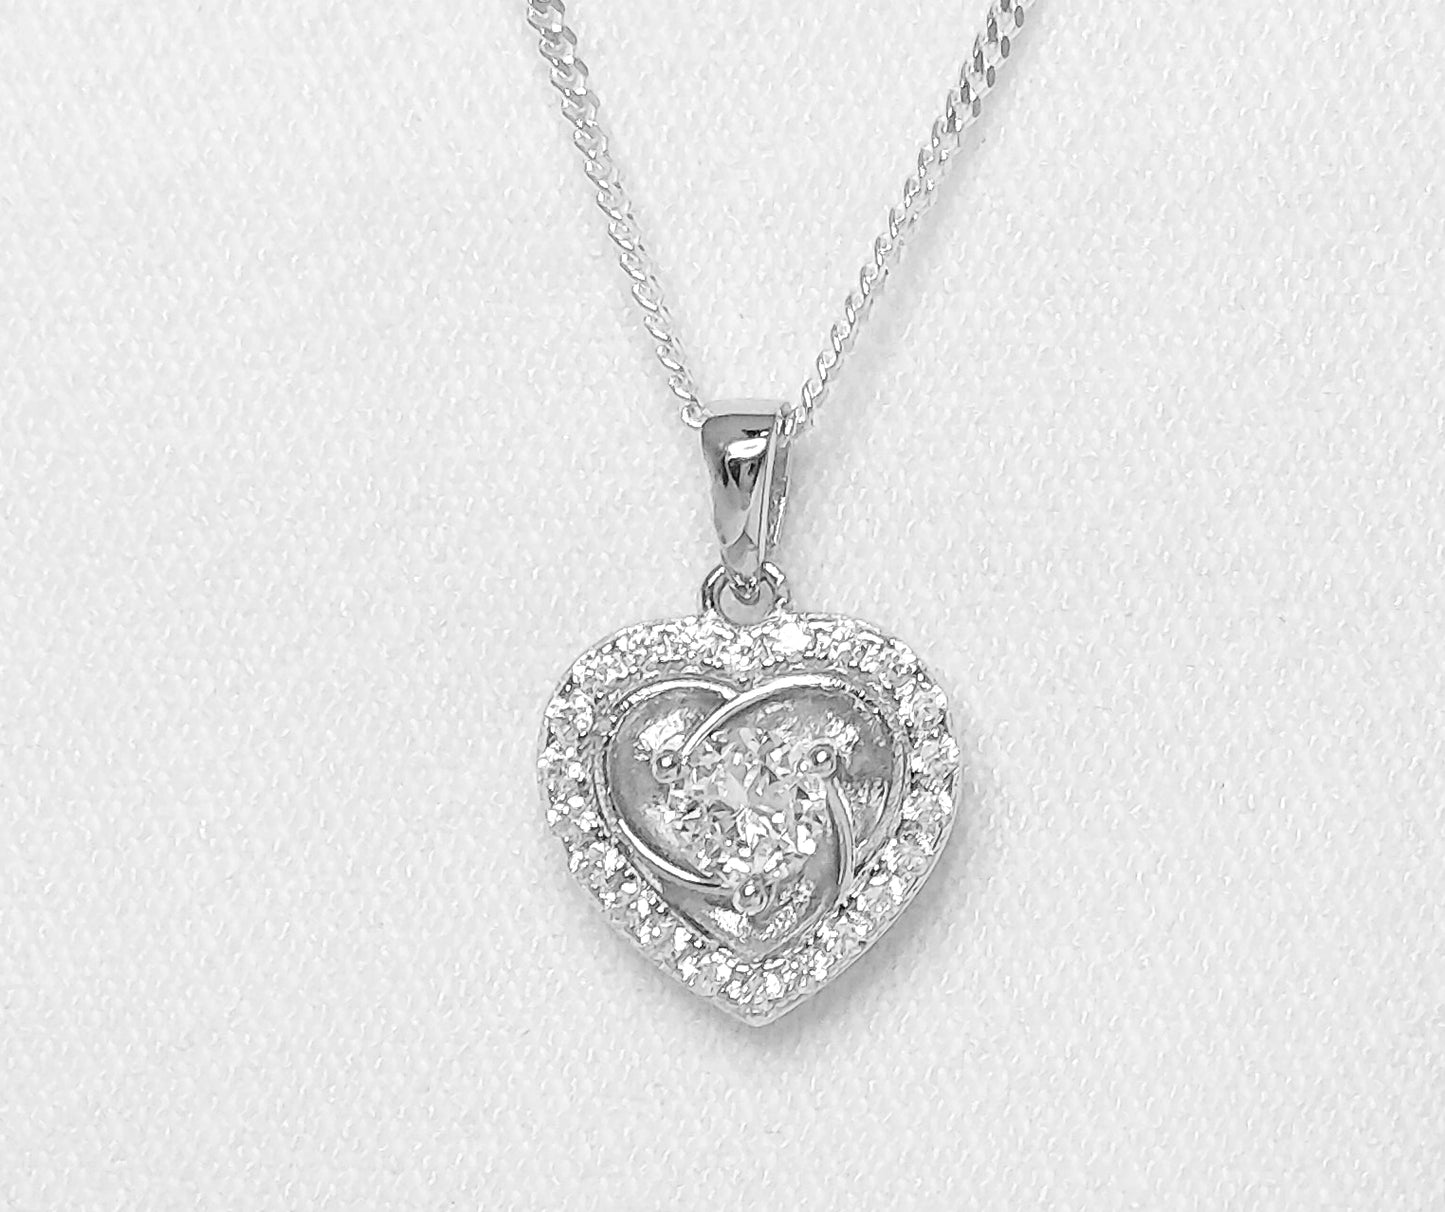 Sterling Silver Heart Pendant with Cubic Zirconia Stones